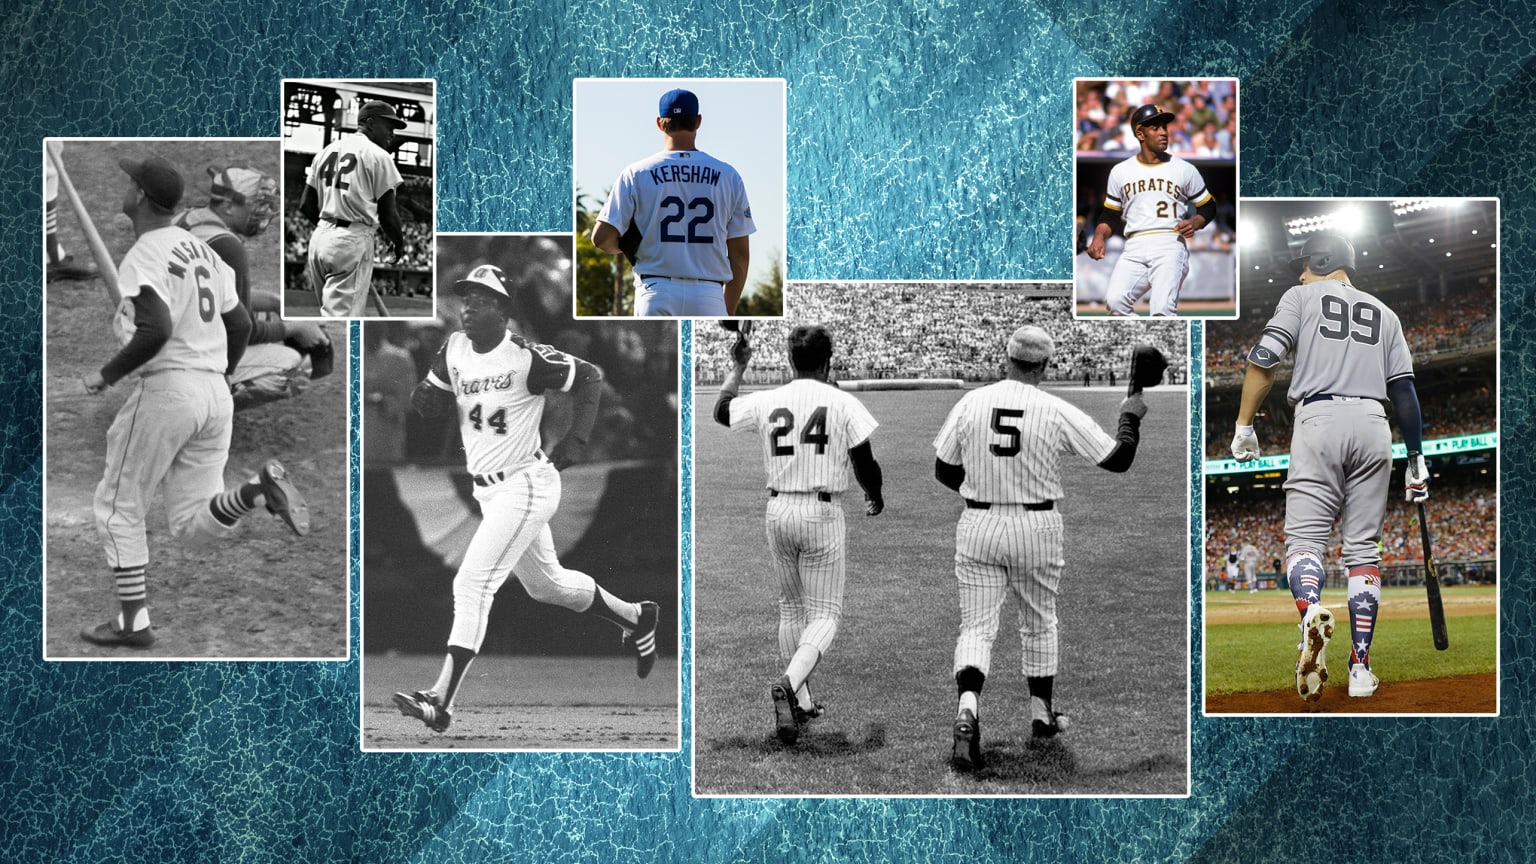 Photo illustration showing the numbers on the backs of numerous jerseys